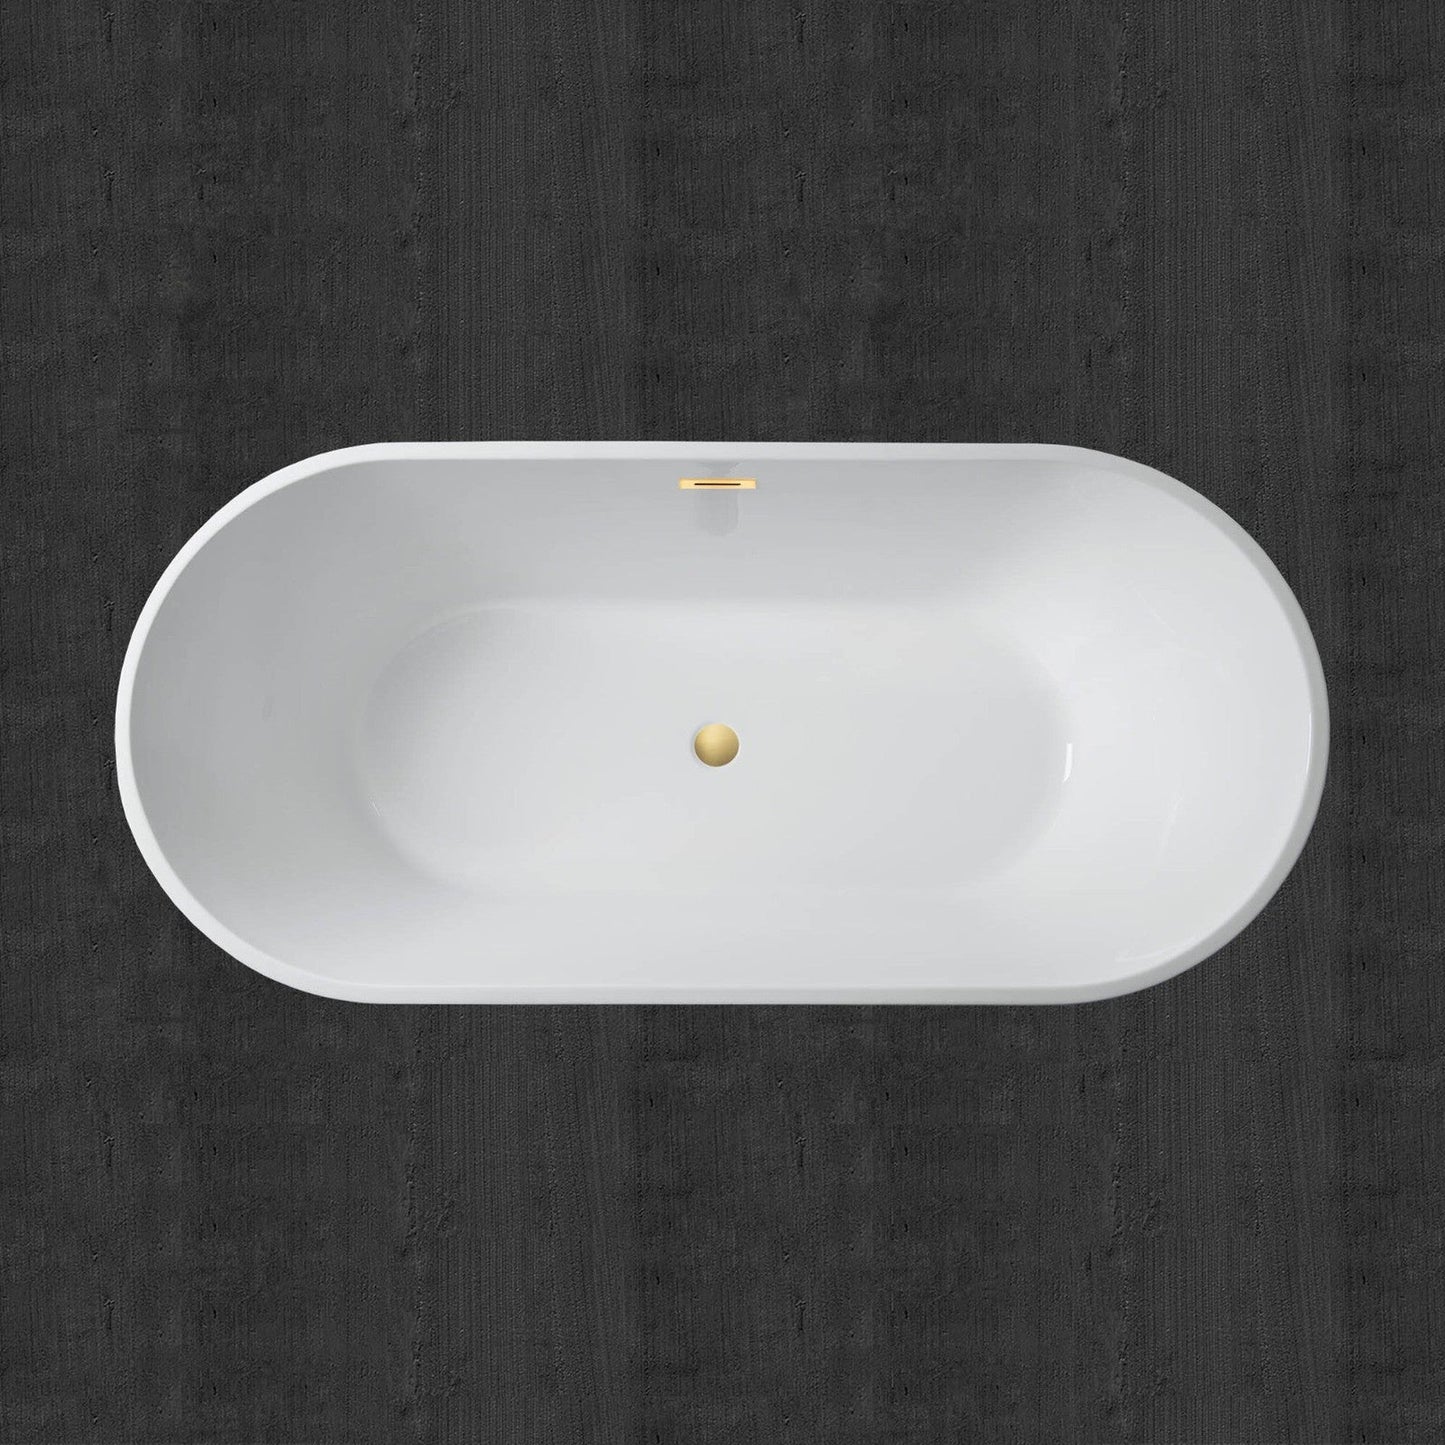 WoodBridge B0014 59" White Acrylic Freestanding Soaking Bathtub With Brushed Gold Drain, Overflow, F0073BGDR Tub Filler and Caddy Tray